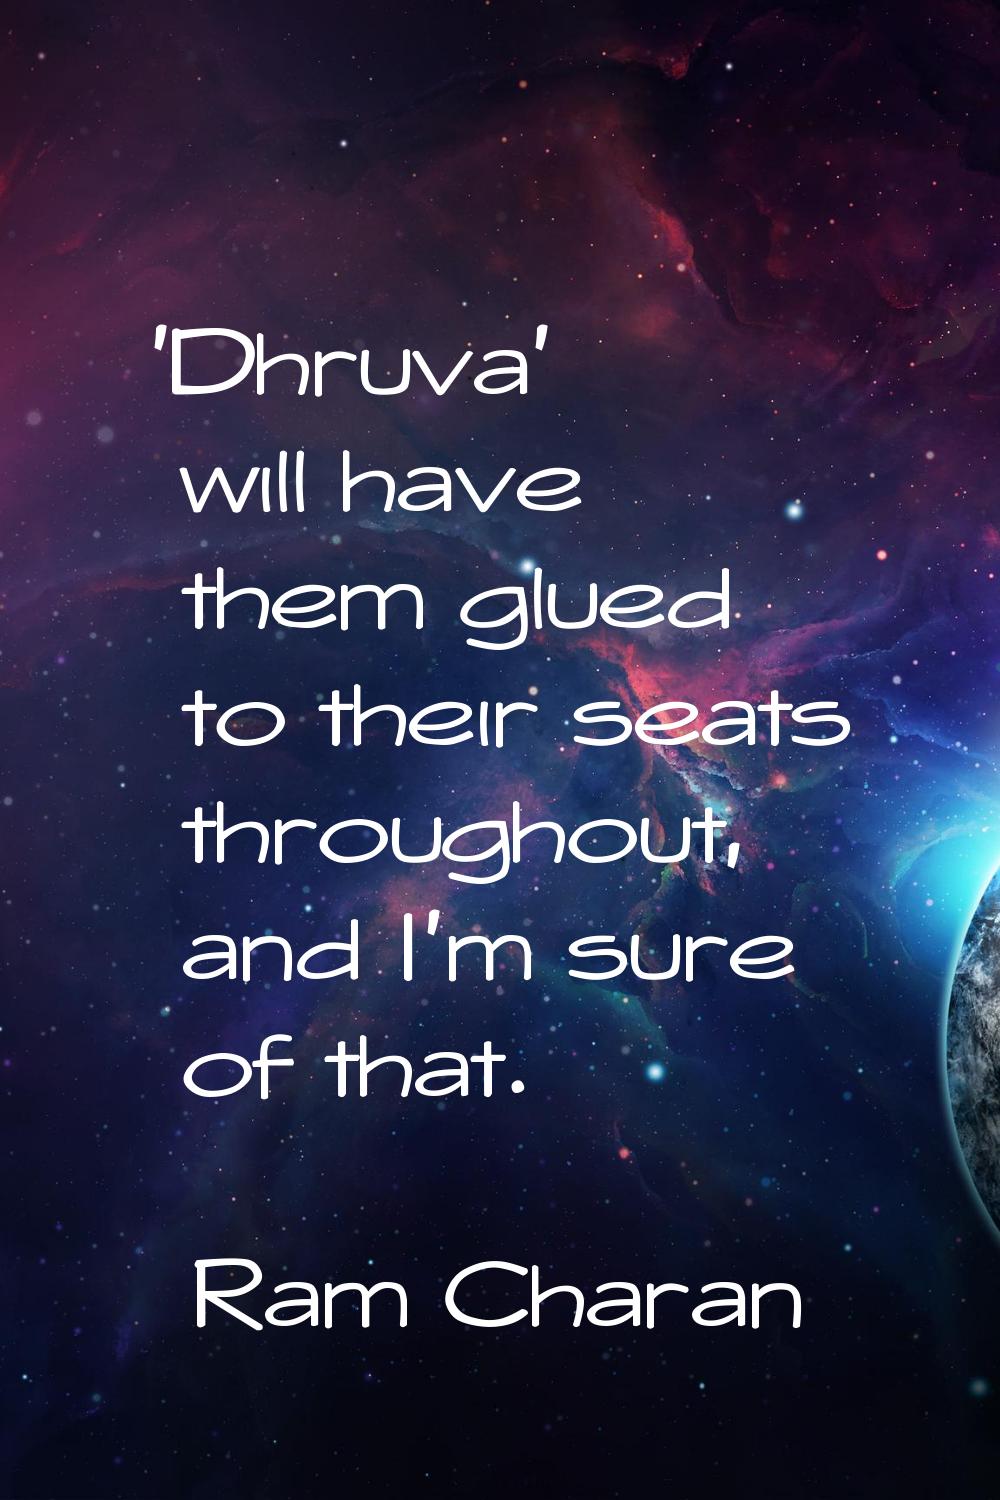 'Dhruva' will have them glued to their seats throughout, and I'm sure of that.